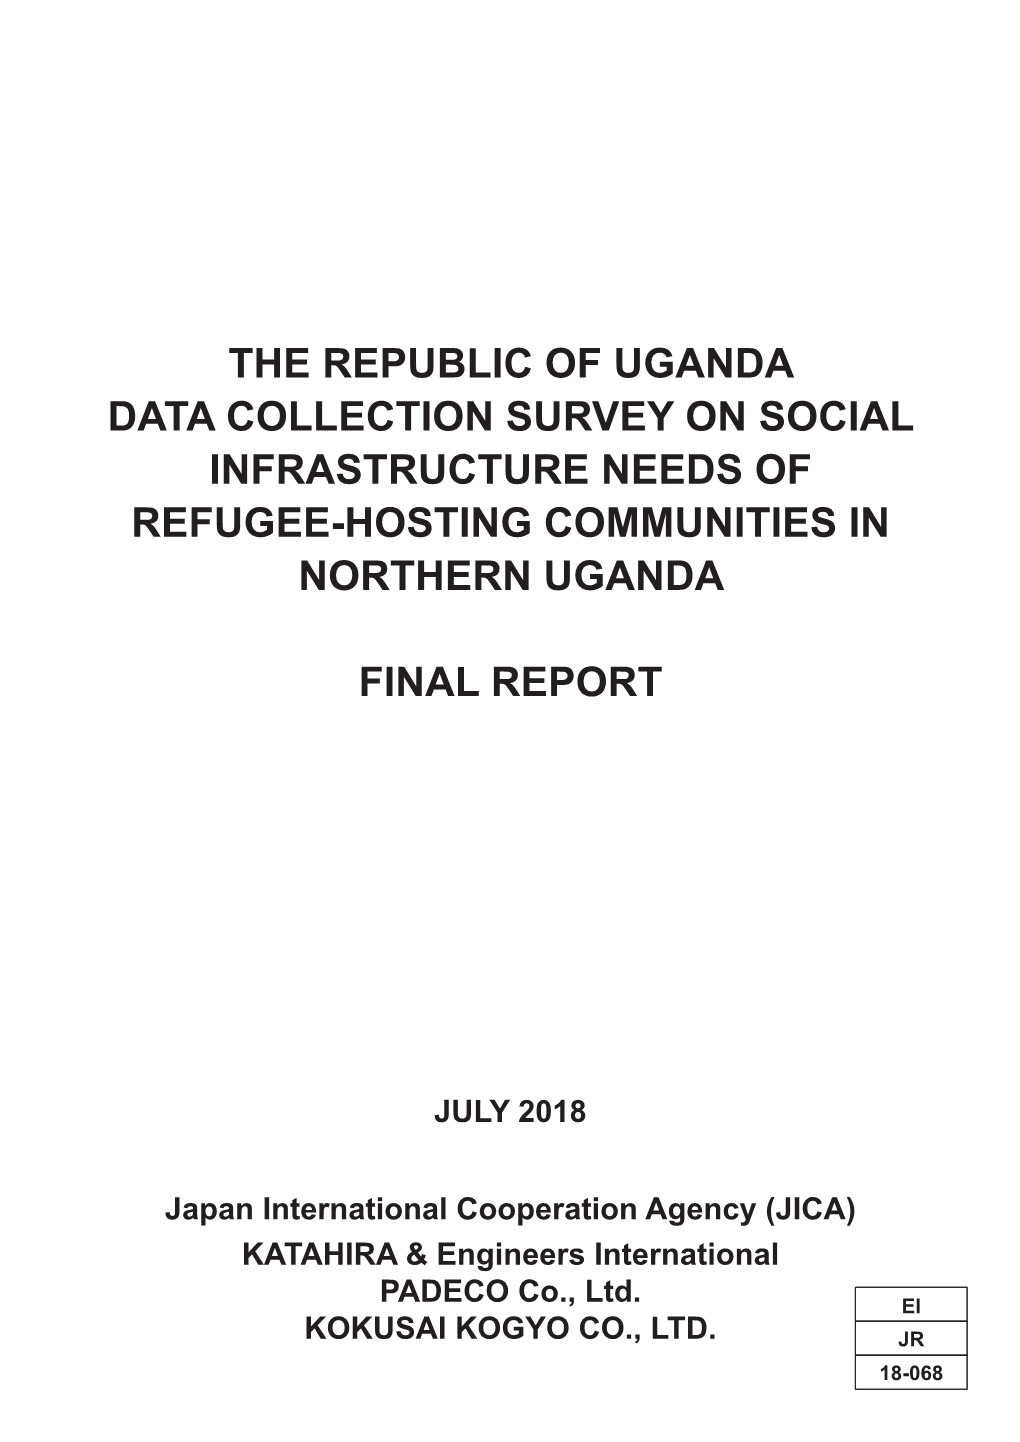 The Republic of Uganda Data Collection Survey on Social Infrastructure Needs of Refugee-Hosting Communities in Northern Uganda